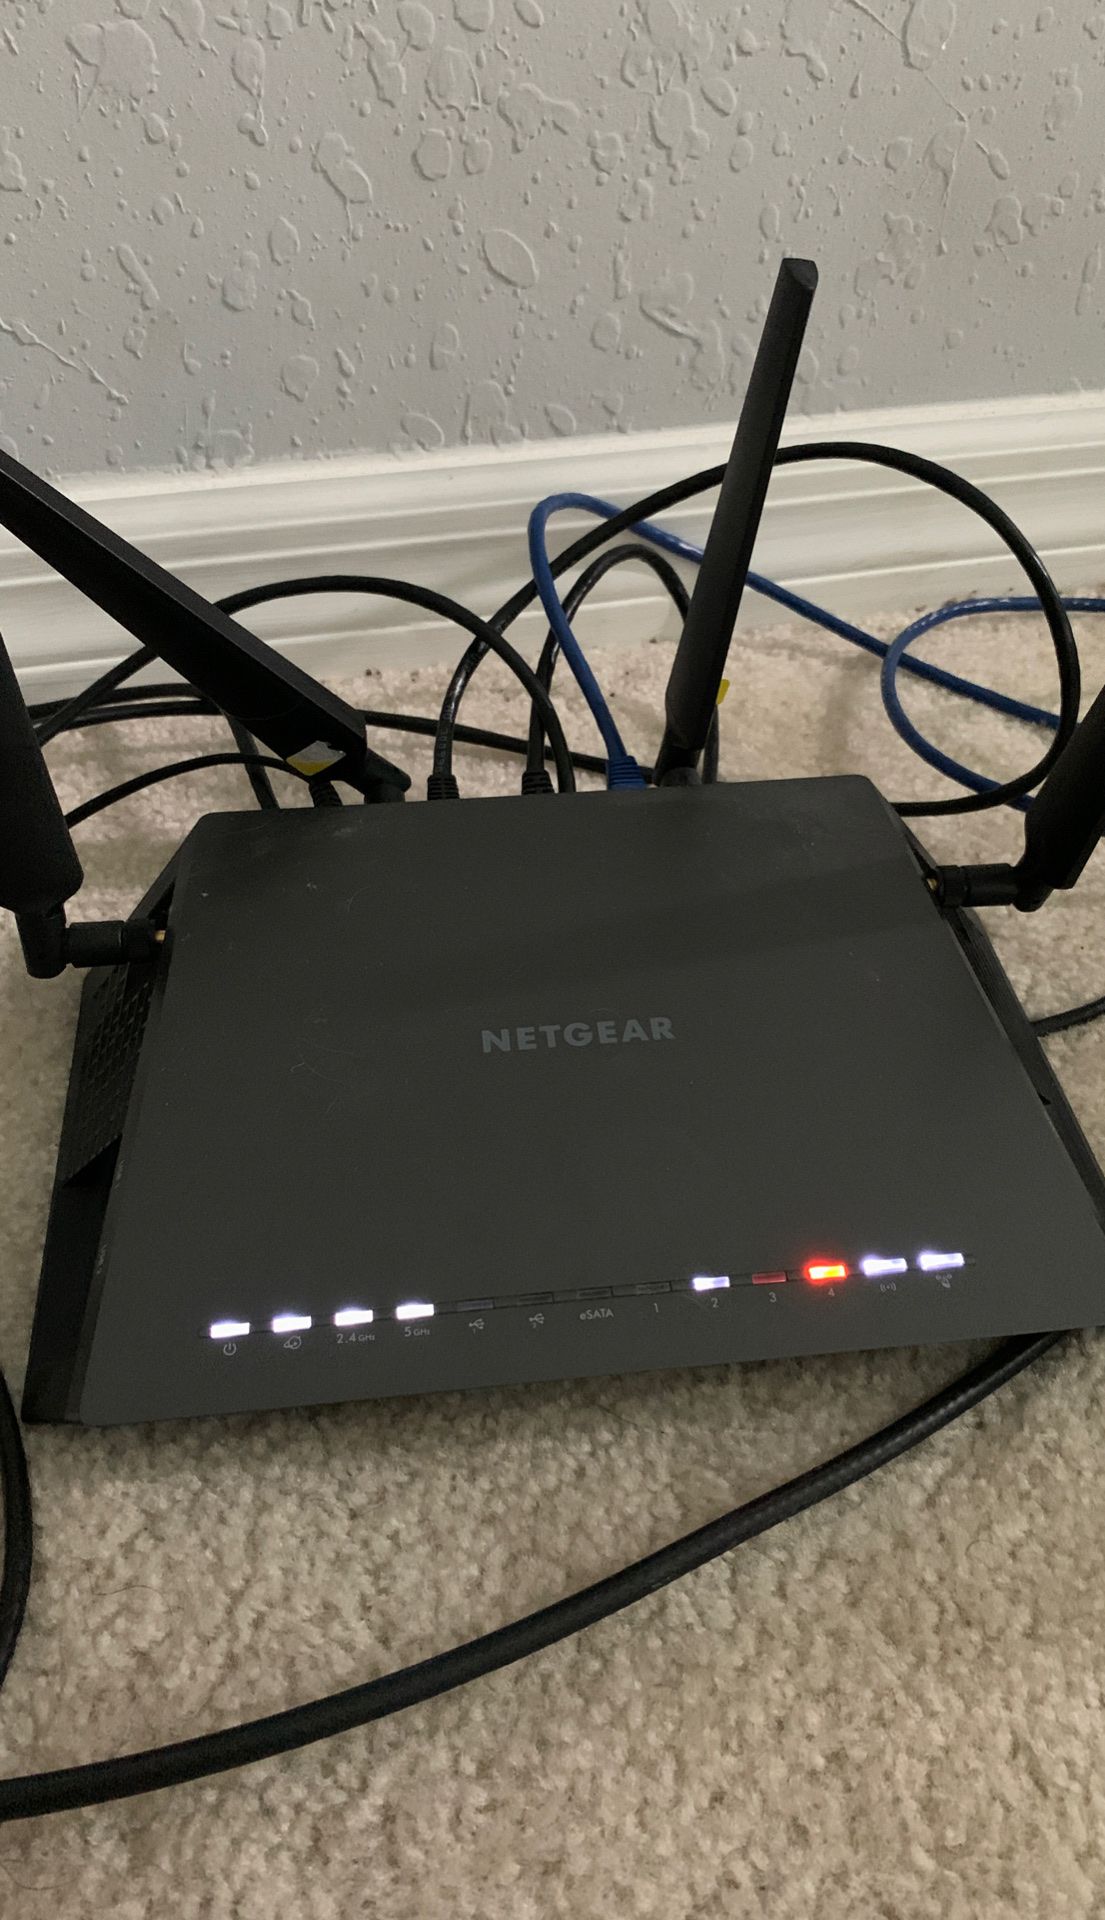 Netgear Nighthawk r7500. Wifi router and arris surfboard modem sb6121 excellent conditions